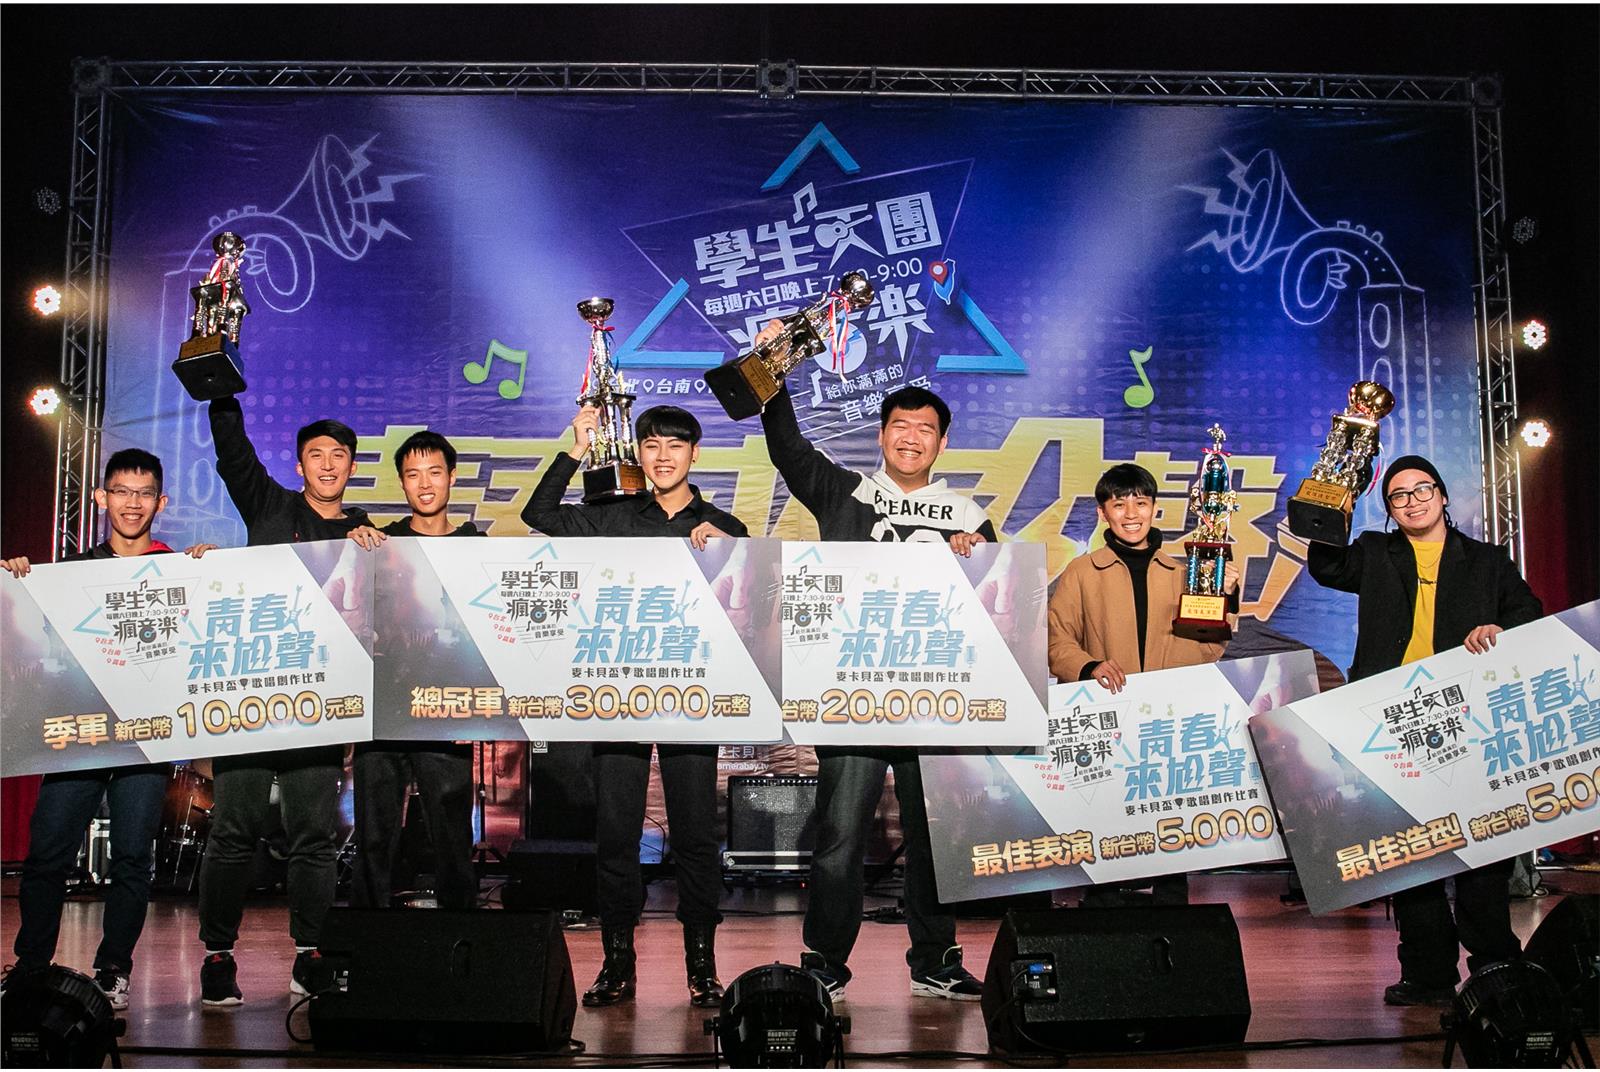 FHK Rock Band(十字隼人) won the championship in Voice of Youth